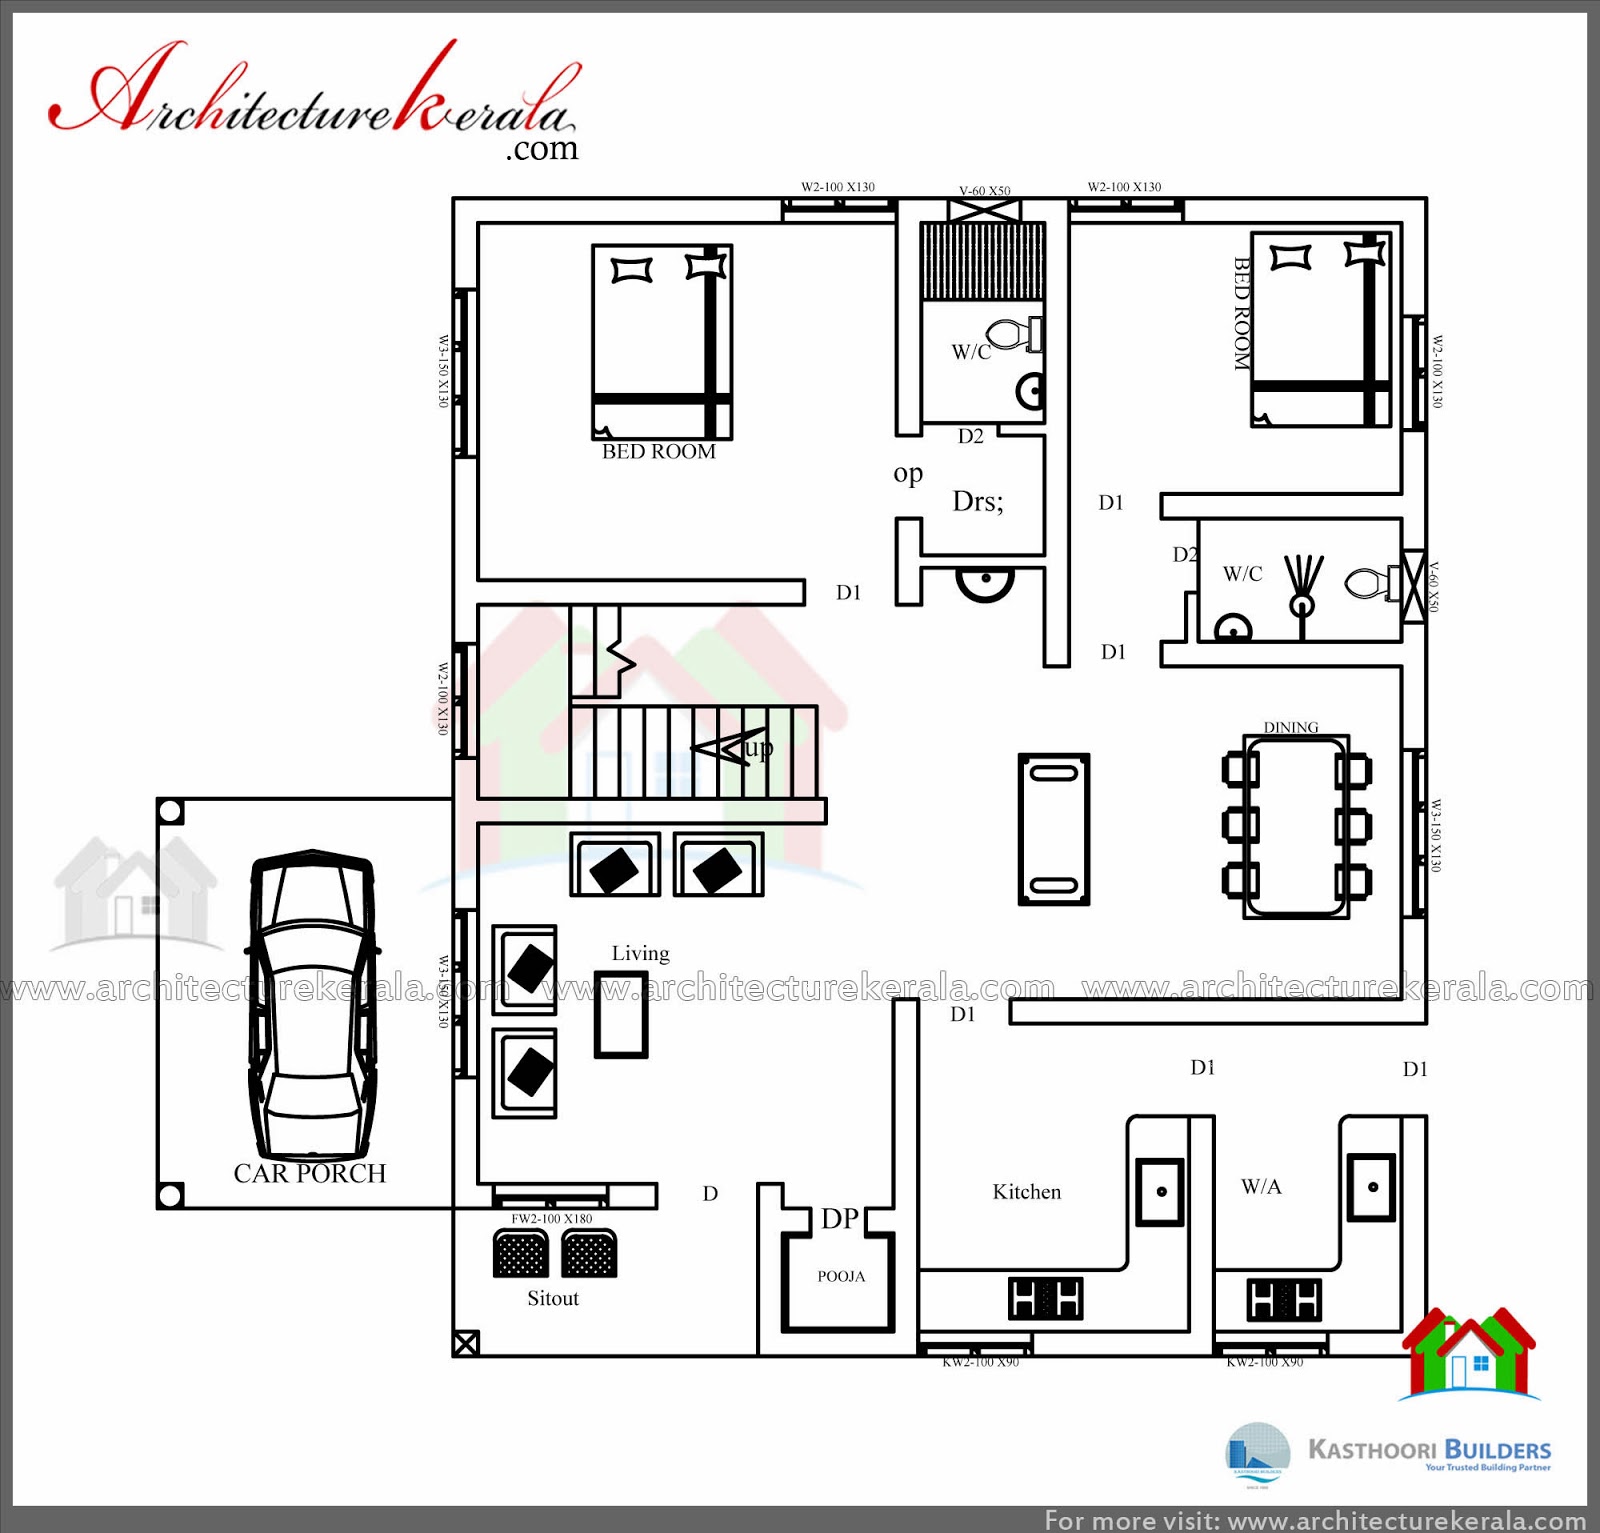  Low  Cost  3  Bedroom  Kerala  House  Plan  with Elevation Free 